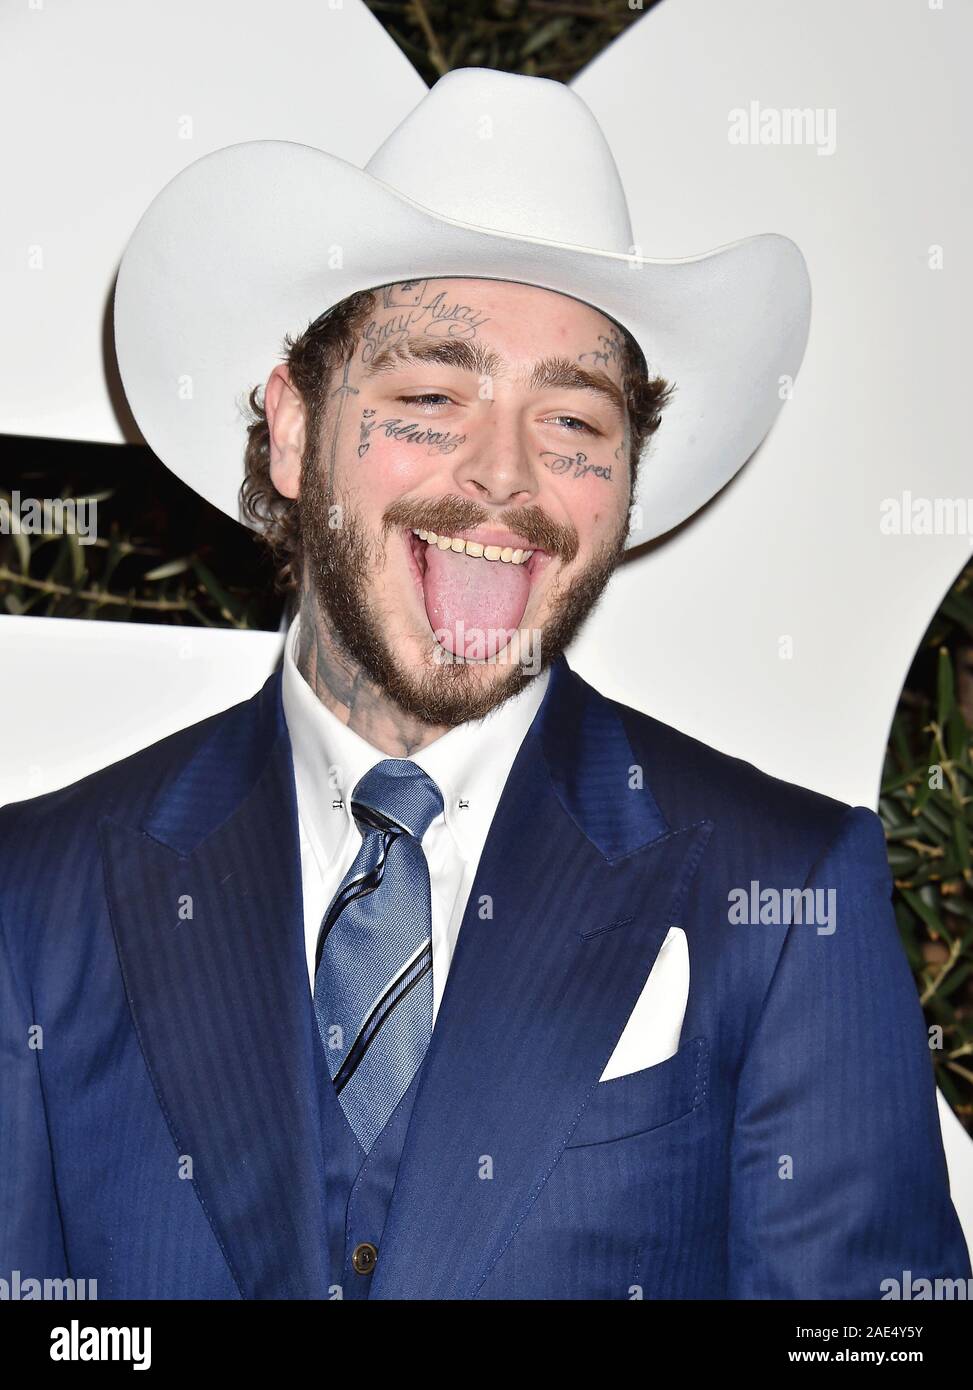 WEST HOLLYWOOD, CA - DECEMBER 05: Post Malone attends the 2019 GQ Men ...